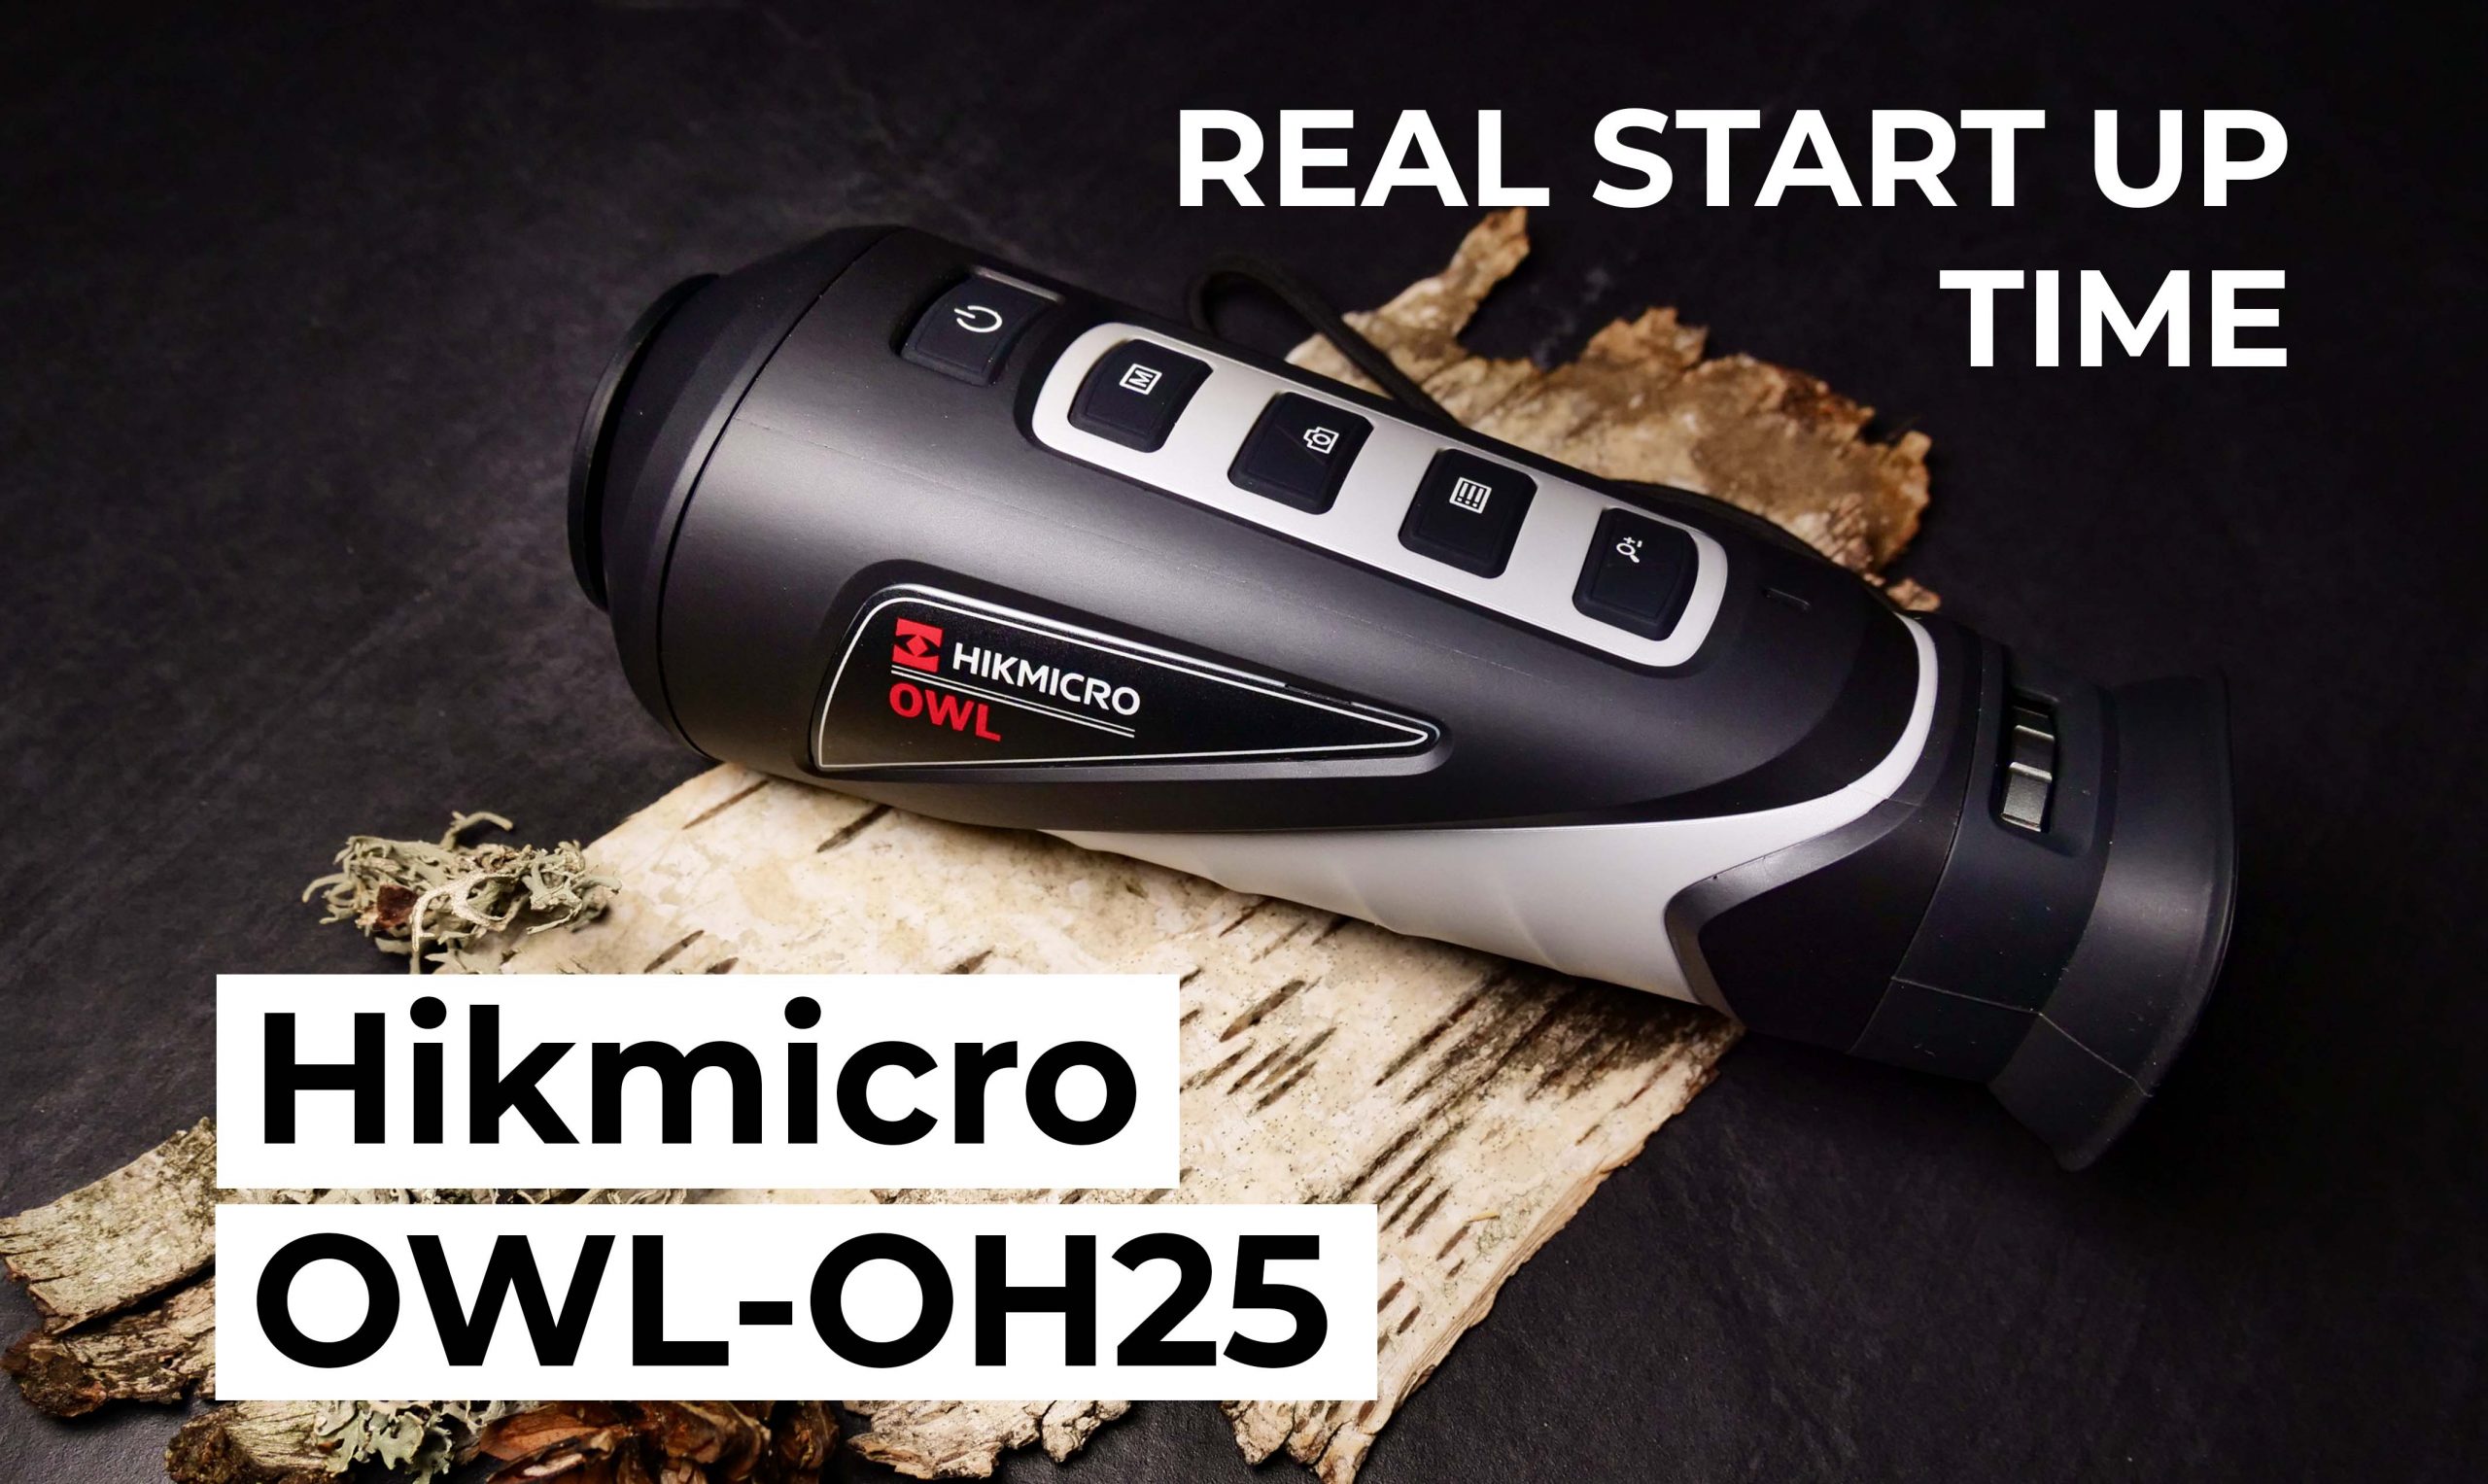 Hikmicro OWL-OH25 - Real Start Up Time